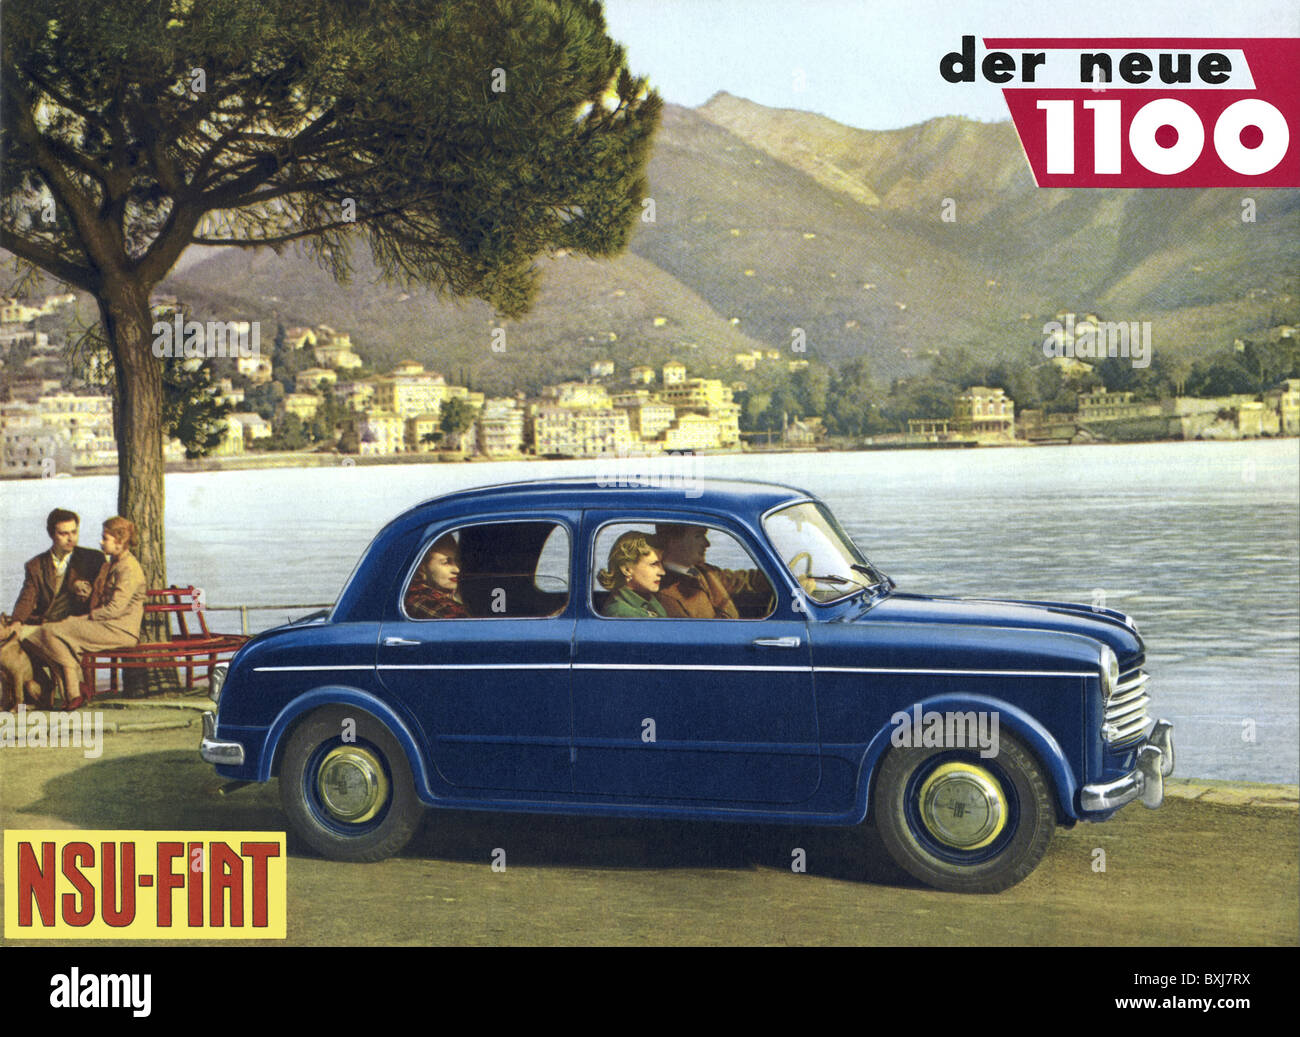 advertising, cars, NSU Fiat 1100, Italy, 1953, 1950s, 50s, 20th century, historic, historical, lakefront, lakeside, holiday trip, holiday trips, Lake Garda, travel, traveling, travelling, four-seater, four-seaters, Italian, column gear change, automobile, automobiles, car, people, Additional-Rights-Clearences-Not Available Stock Photo